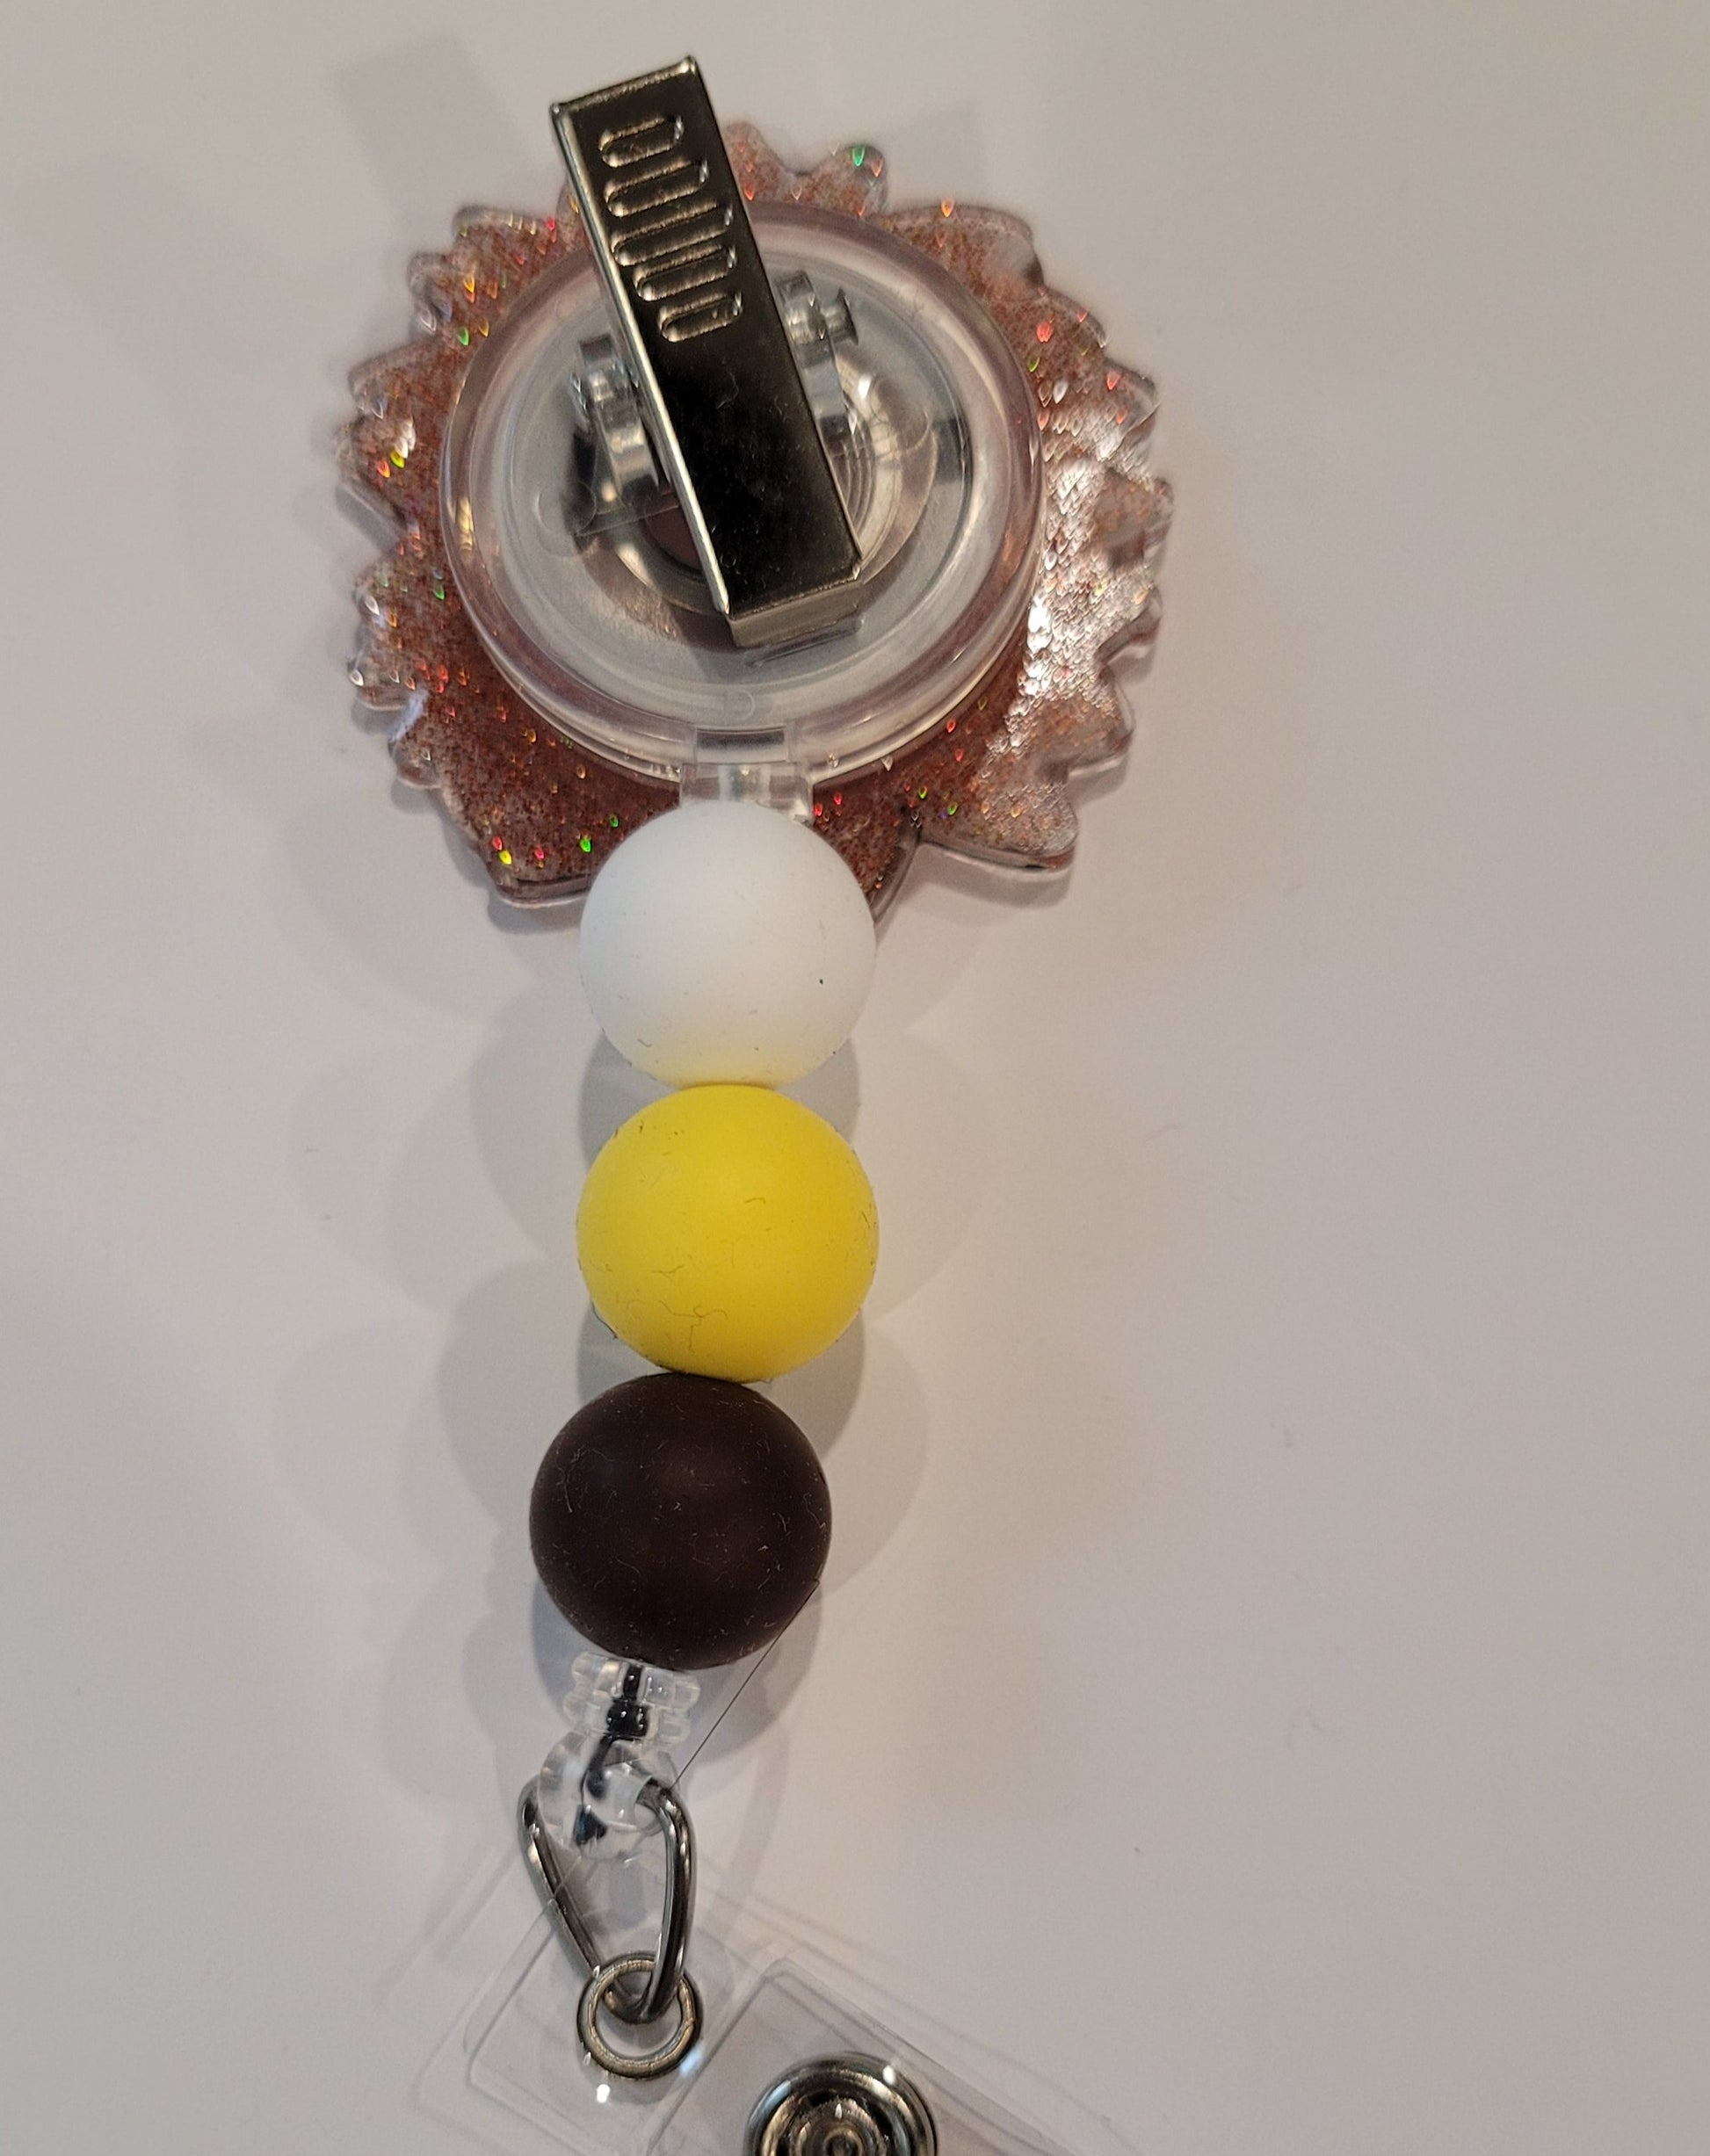 Dare to stand out with the fierce Sunflower Leopard Print Badge Reel. Its vibrant colors and dazzling glitter base will make a statement, enhanced by three coordinating silicone beads for a touch of adventure.